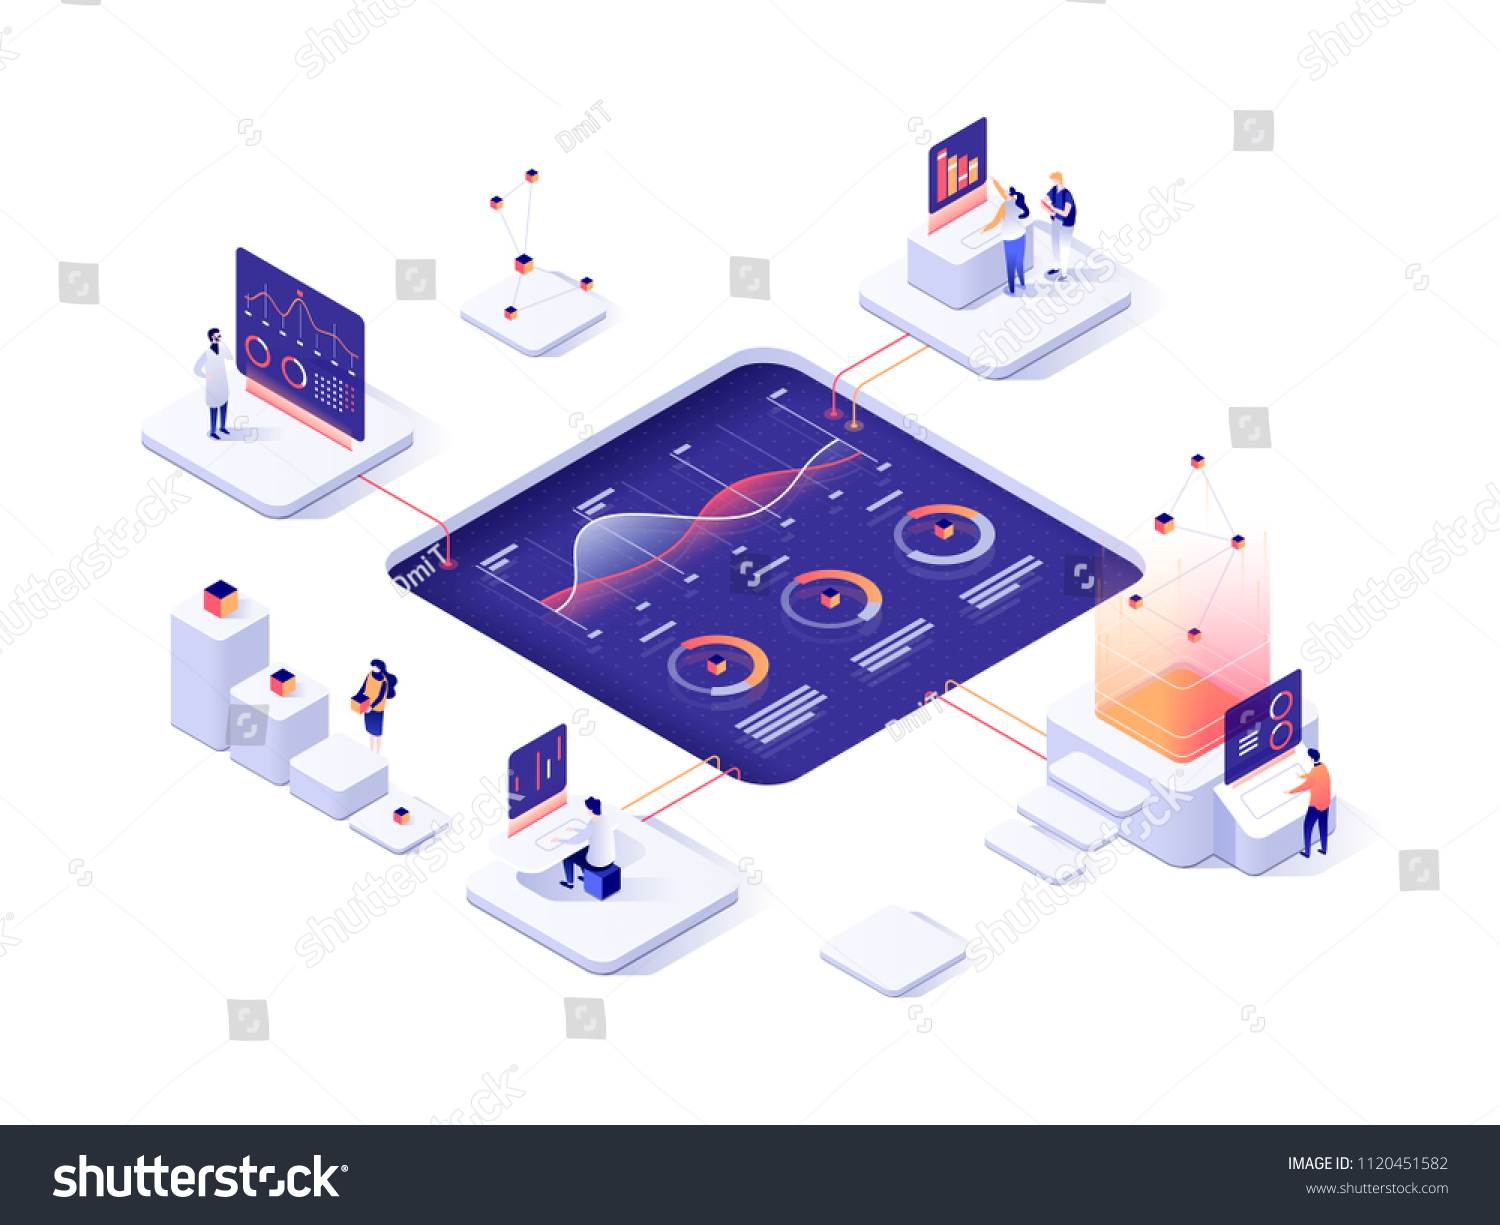 People interacting with charts and analyzing statistics. Data visualization concept. 3d isometric vector illustration. #1120451582